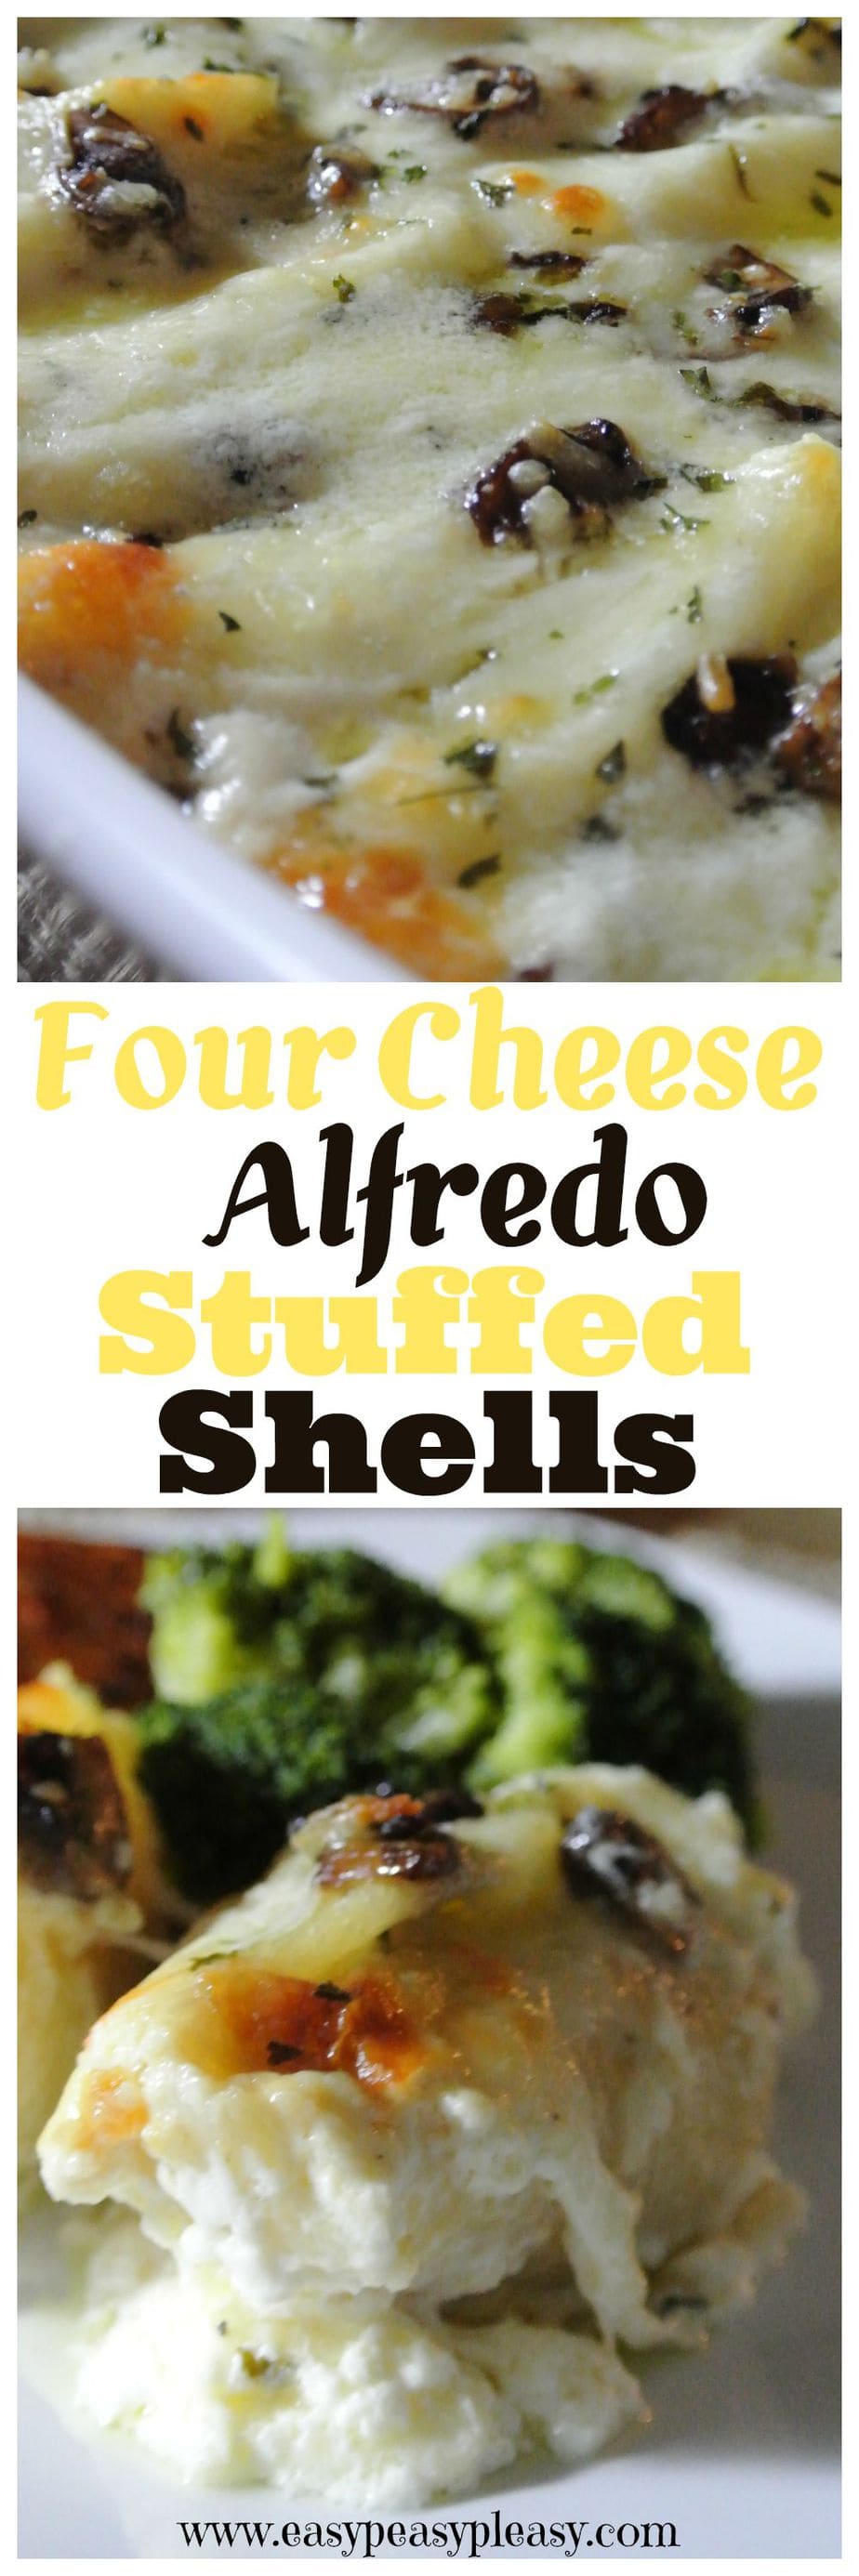 This is one of my all time favorite dishes! The Alfredo sauce is super easy and so delicious over the four cheese stuffed shells. This dish is a great freezer meal option!